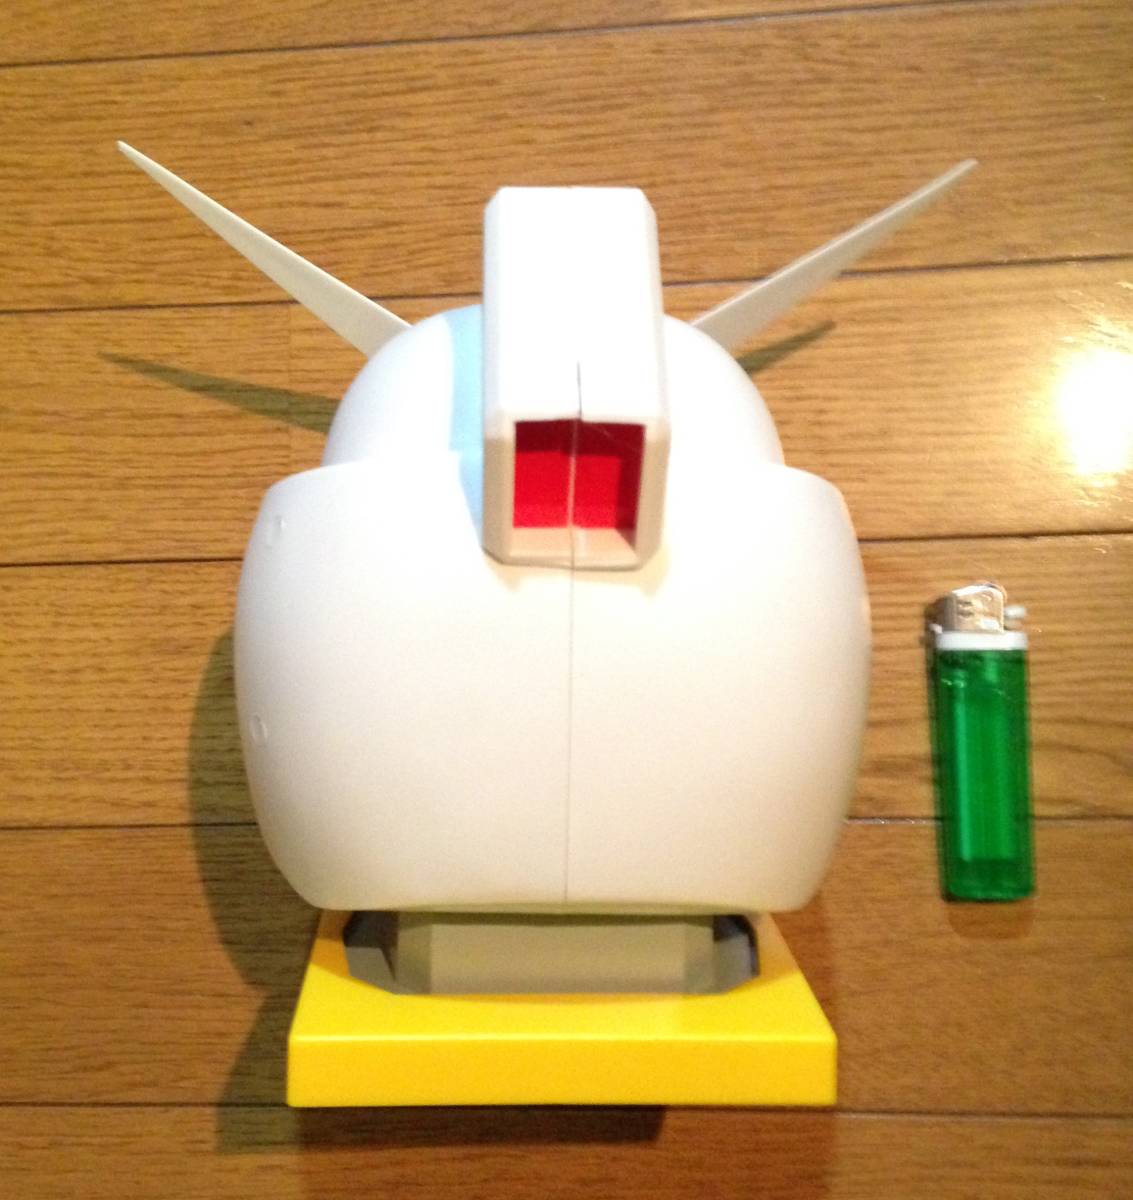  Mobile Suit Gundam flash sound head shines!!..!! electron operation verification ending . excellent condition!! ultra rare Vintage retro that time thing 